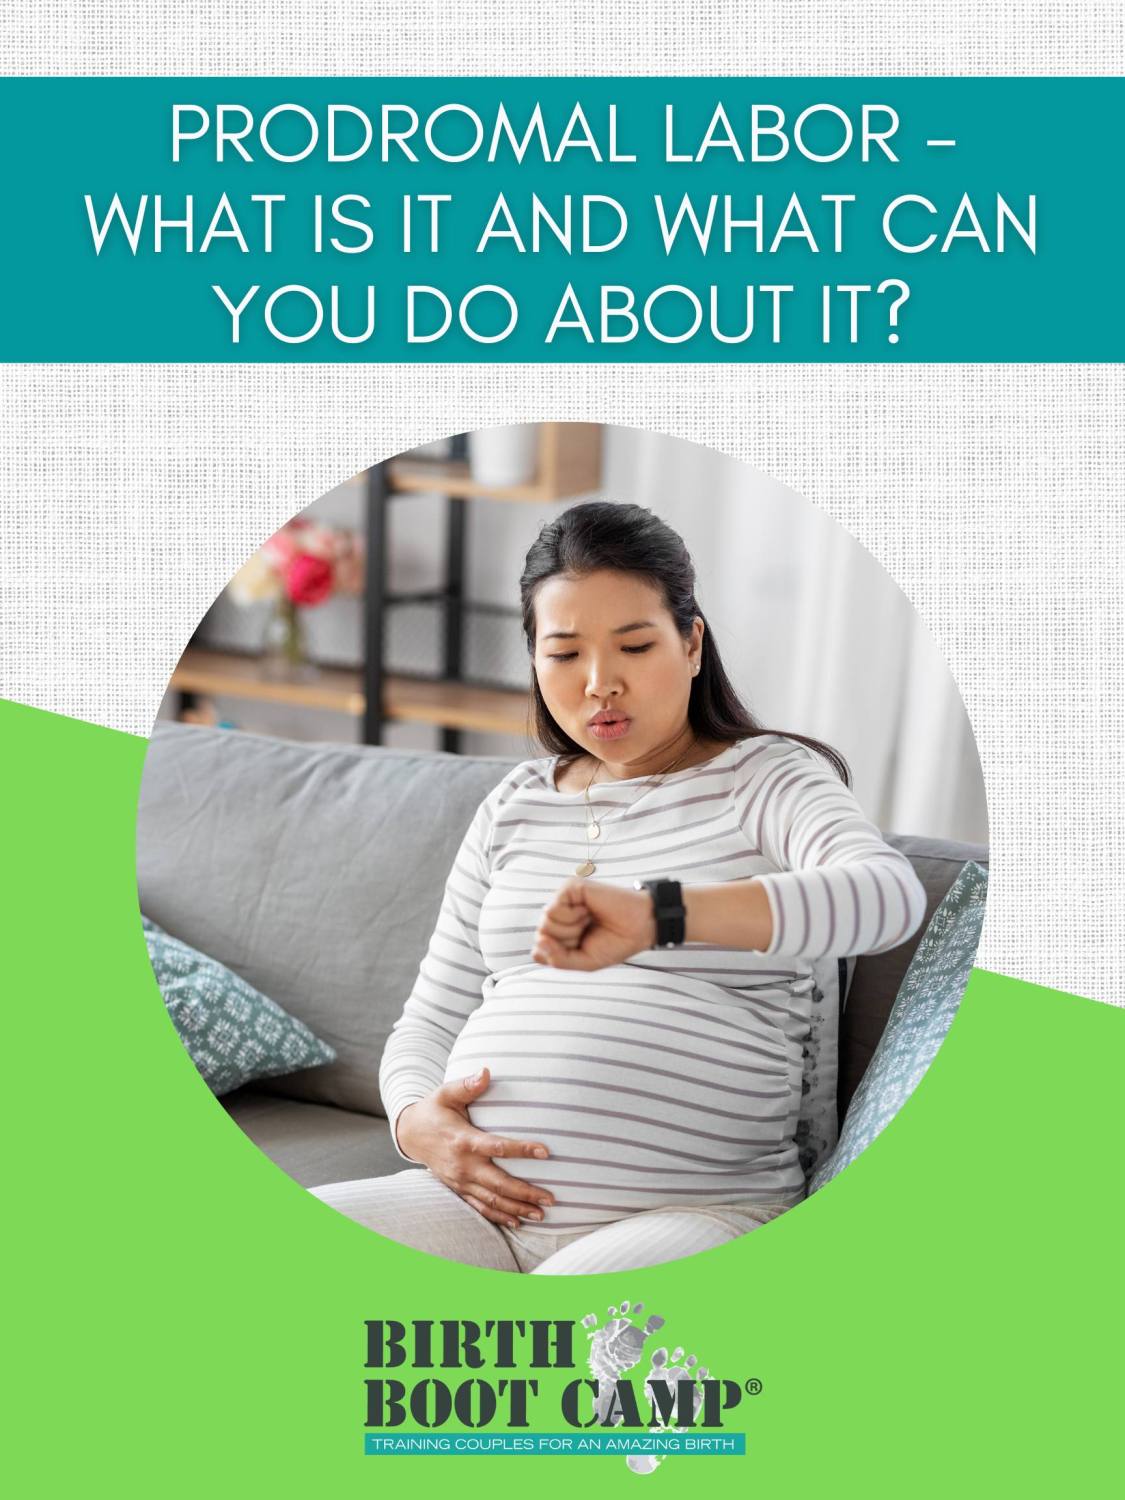 Text: Prodromal Labor - What is it and what can you do about it? Image - Pregnant woman wearing a striped shirt sitting on a couch. She is holding her pregnant belly and breathing out. Looks like she is timing a contraction.